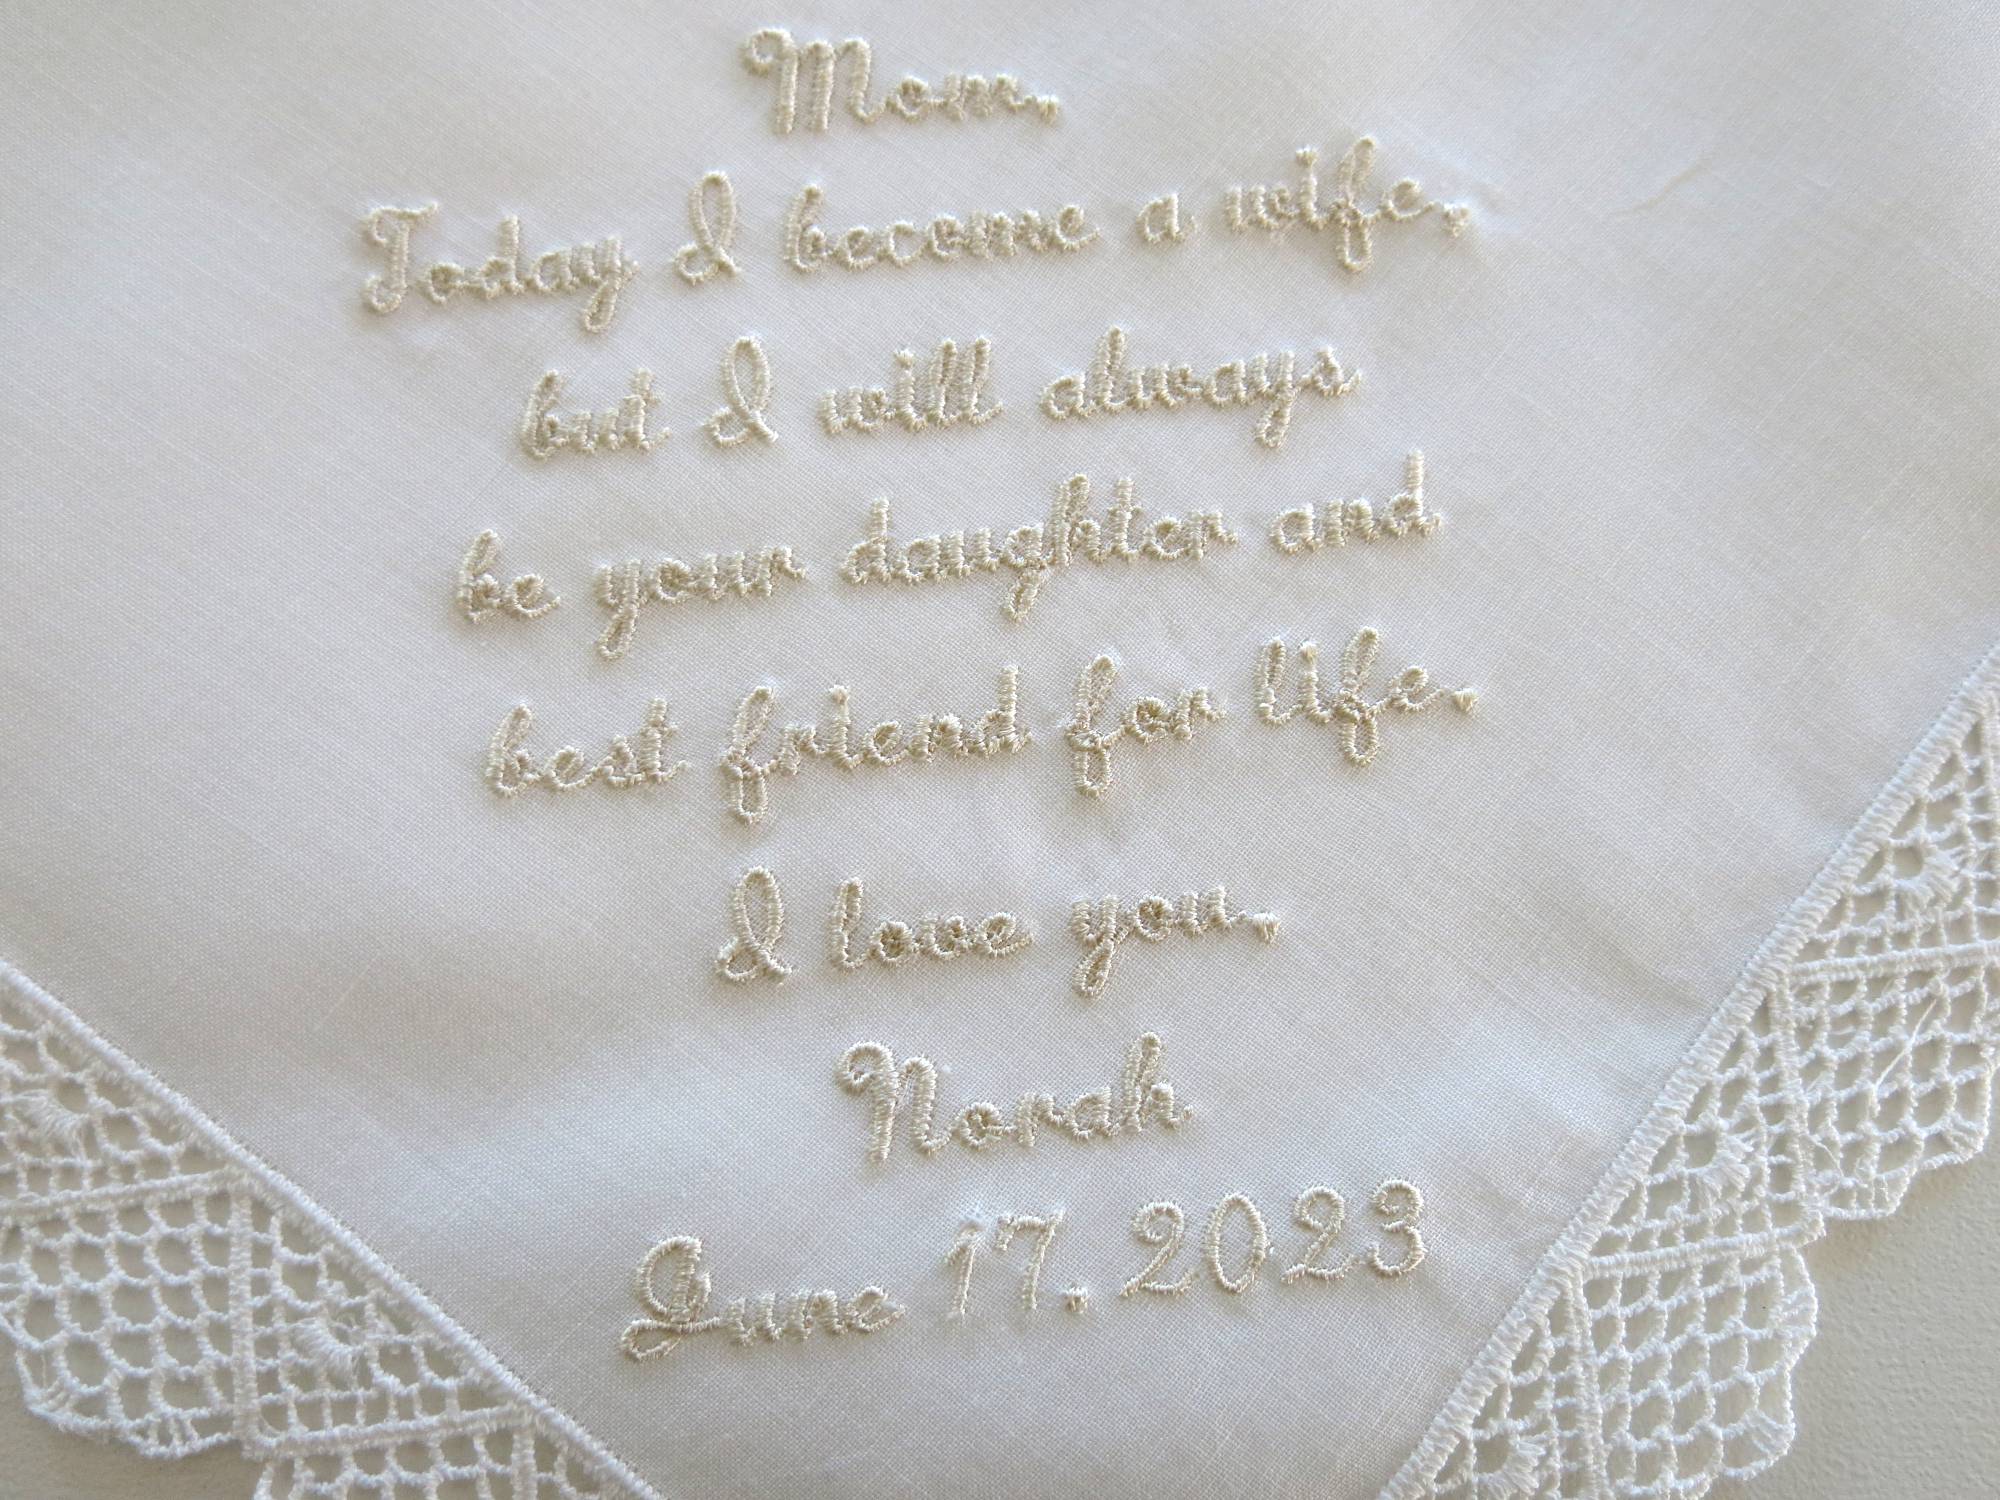 Mother of the Bride Wedding Handkerchief with Message from the Bride